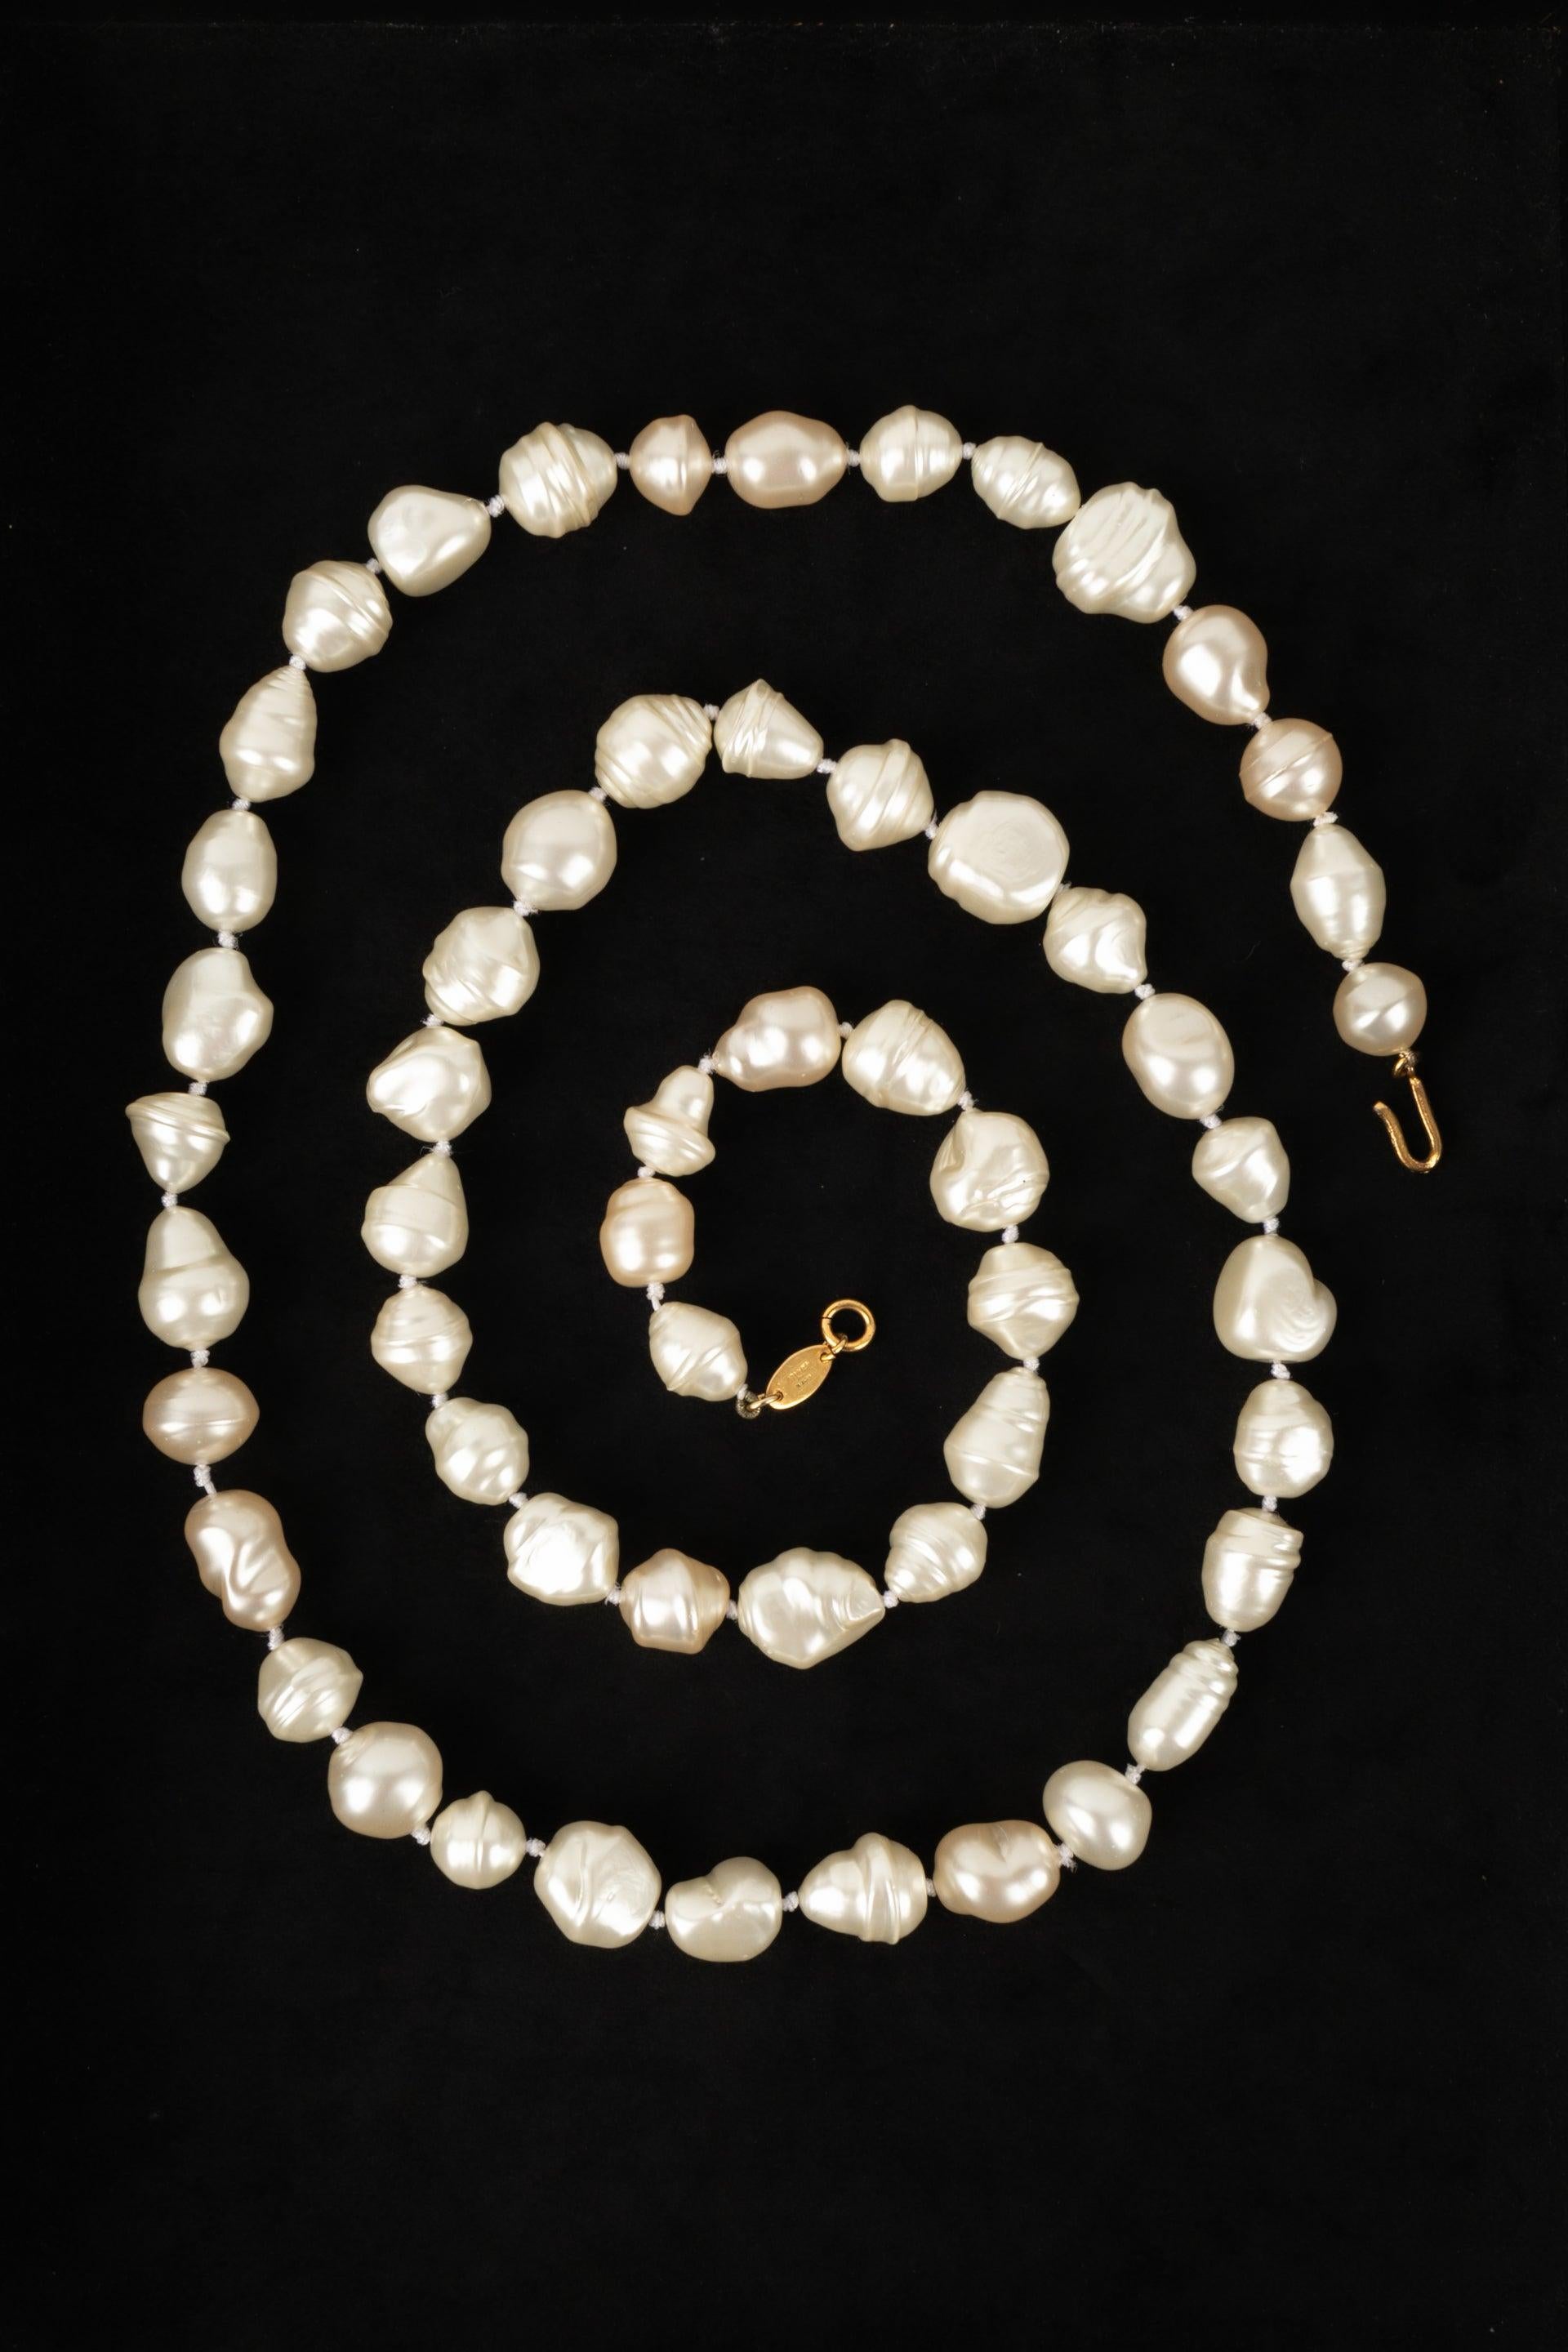 Chanel - (Made in France) Costume pearl necklace / sautoir. 1984 Collection.

Additional information:
Condition: Very good condition
Dimensions: Length: 106 cm

Seller Reference: CB50